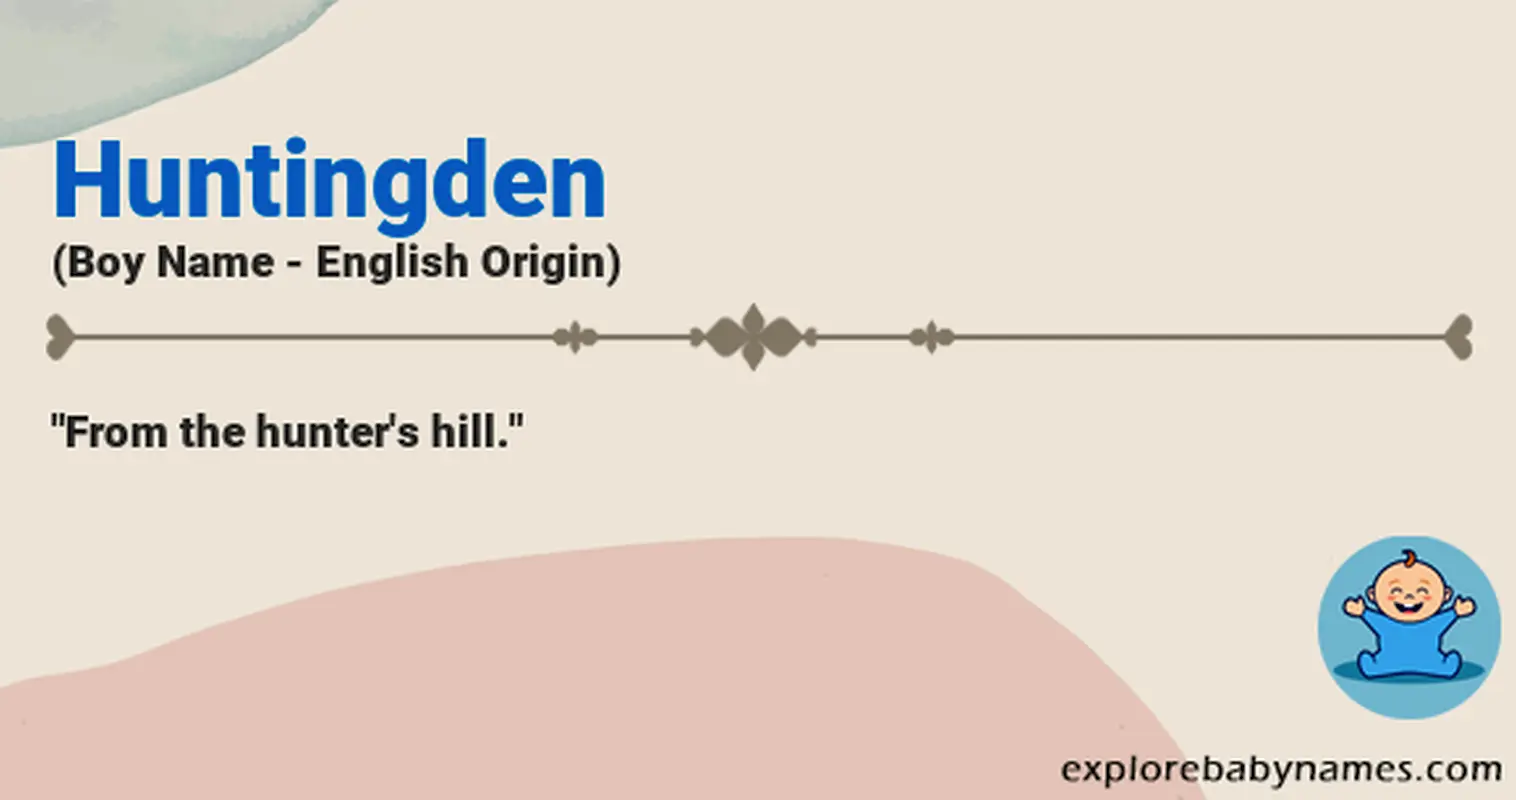 Meaning of Huntingden